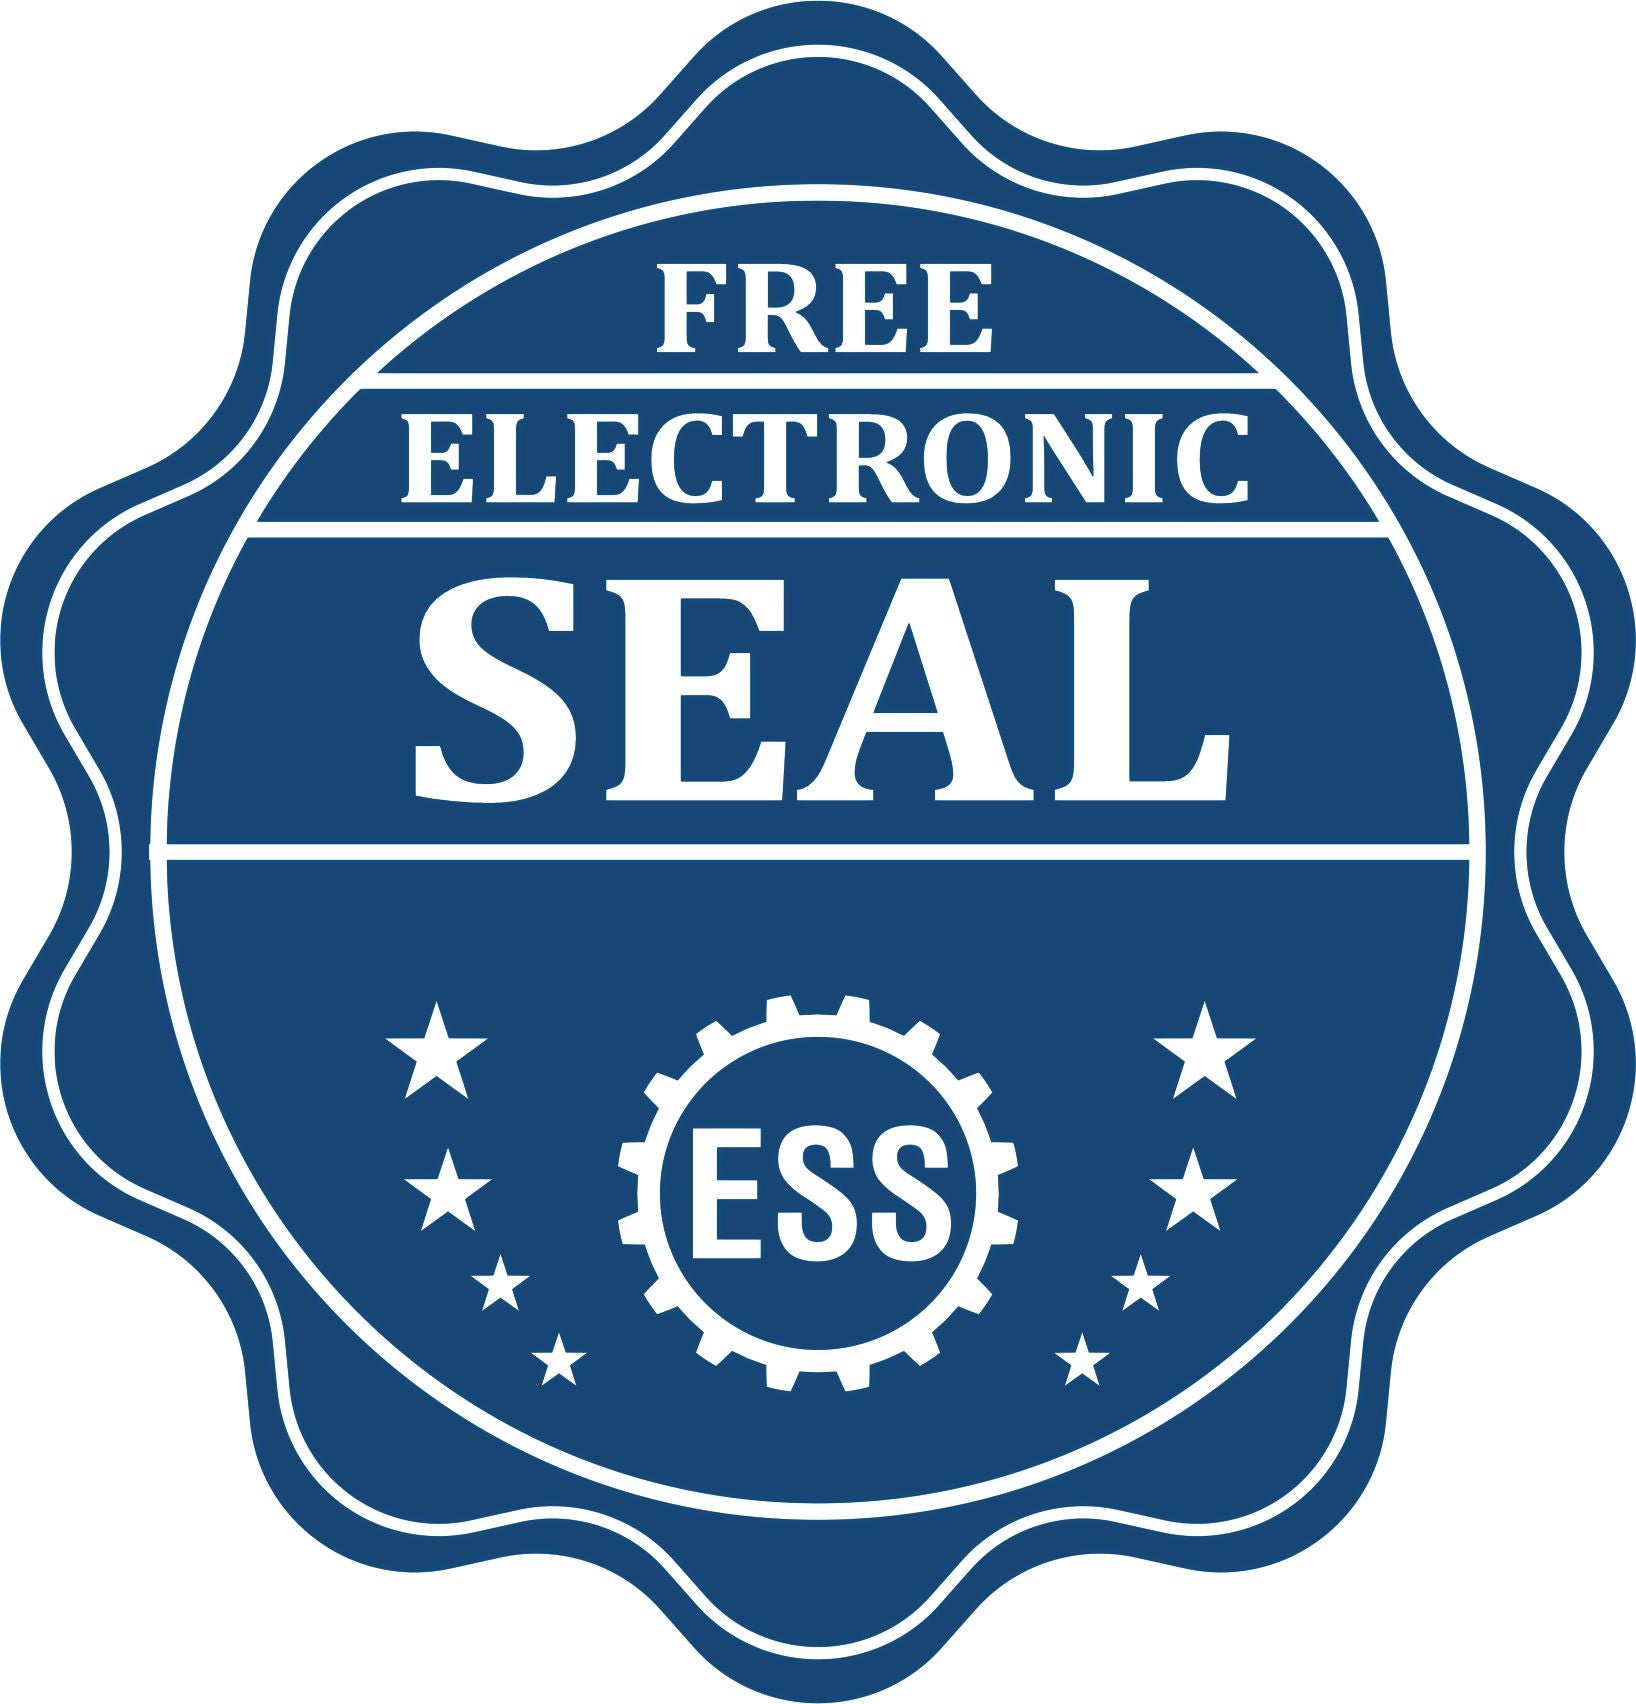 A badge showing a free electronic seal for the Connecticut Desk Architect Embossing Seal with stars and the ESS gear on the emblem.